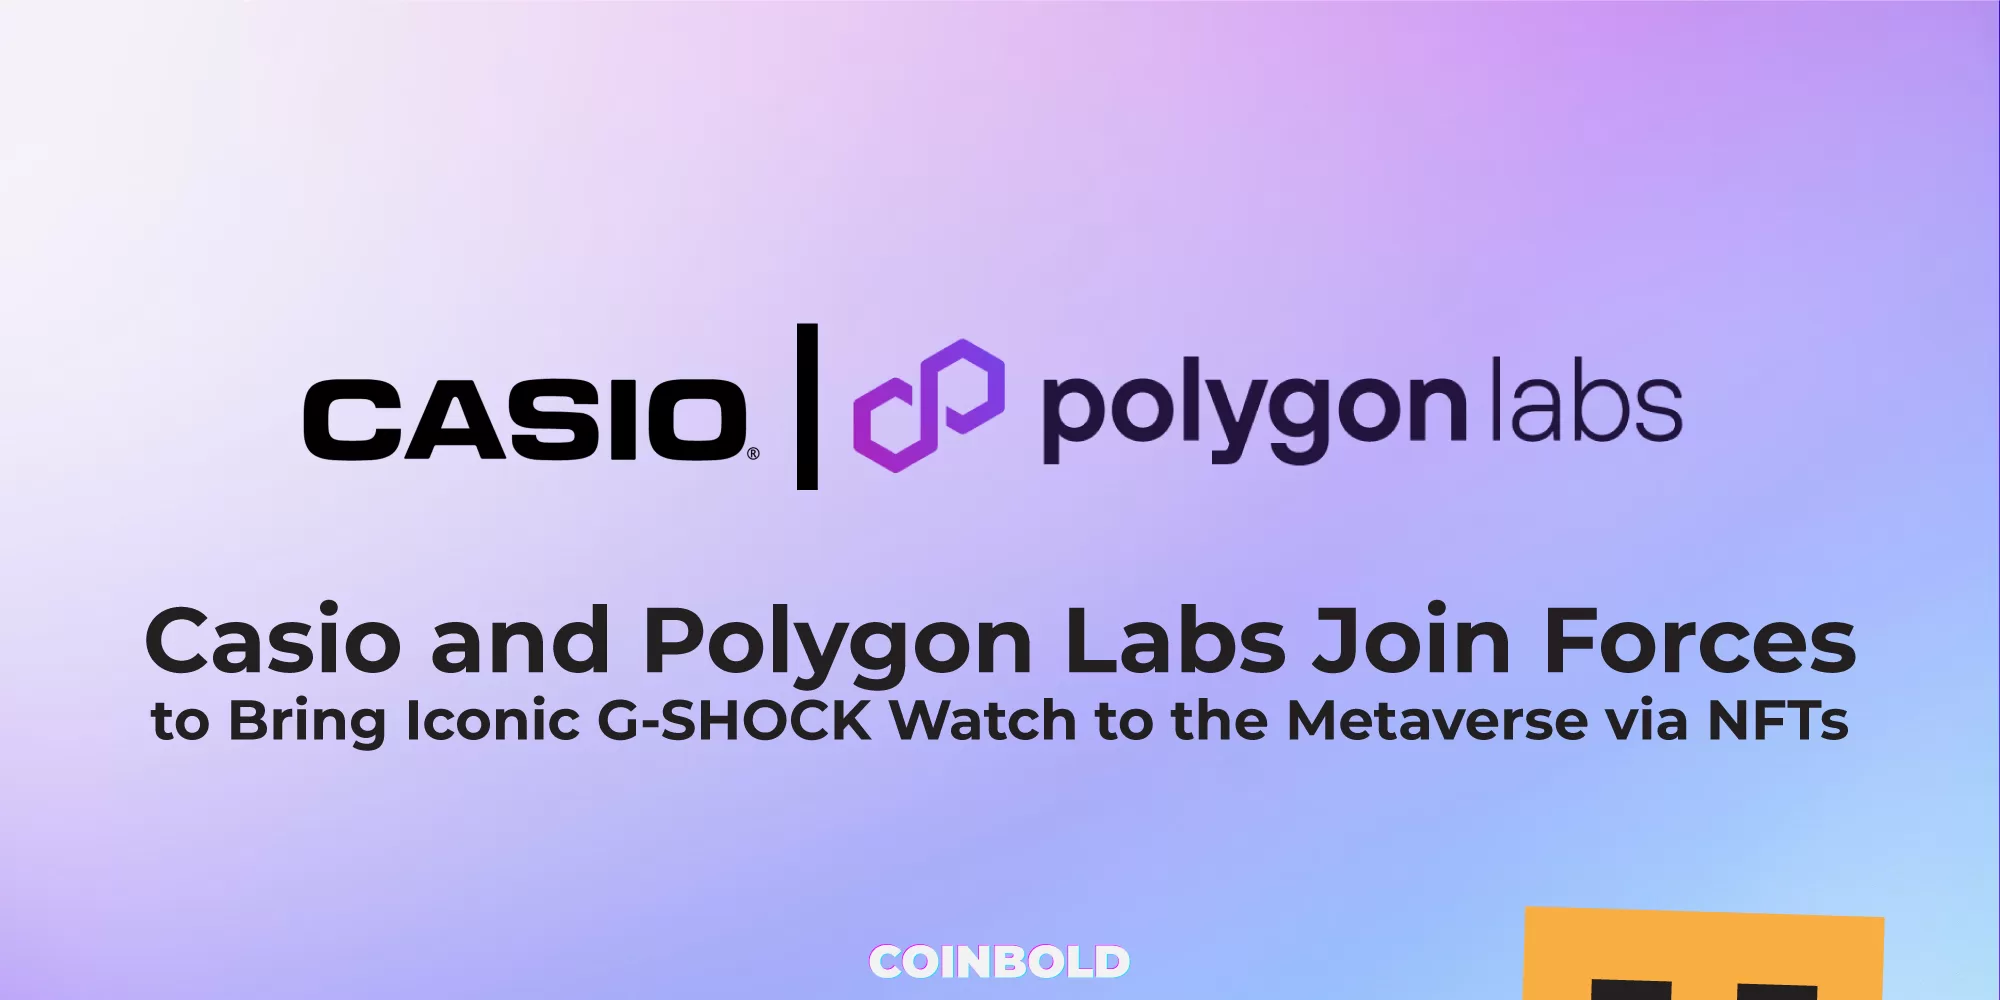 Casio and Polygon Labs Join Forces to Bring Iconic G SHOCK Watch to the Metaverse via NFTs